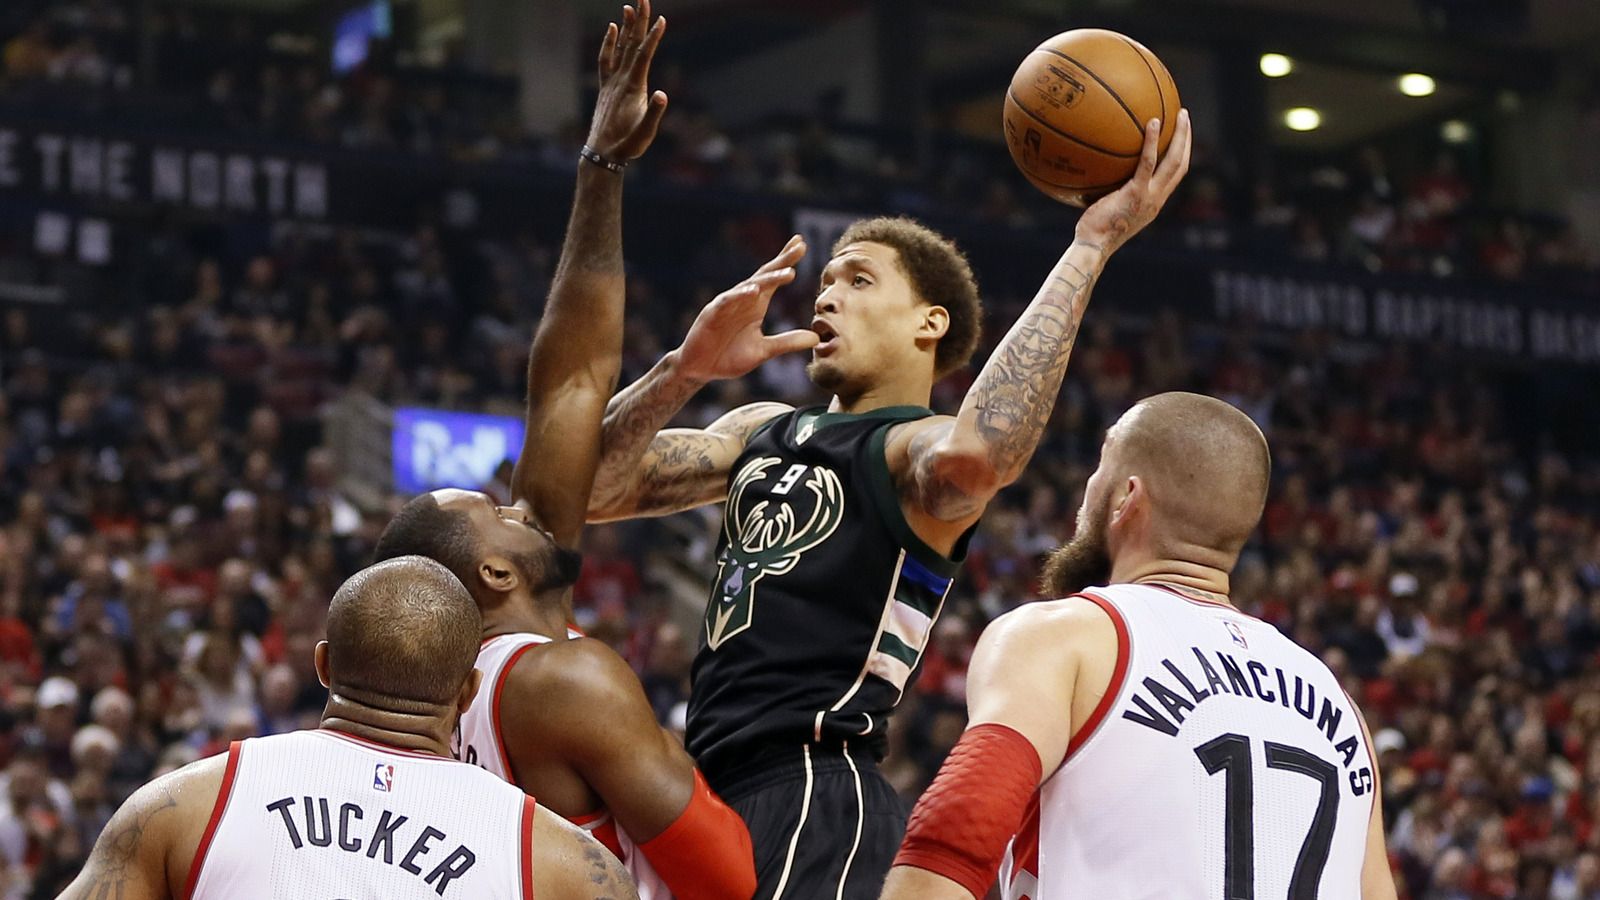 Michael Beasley tired of not being respected